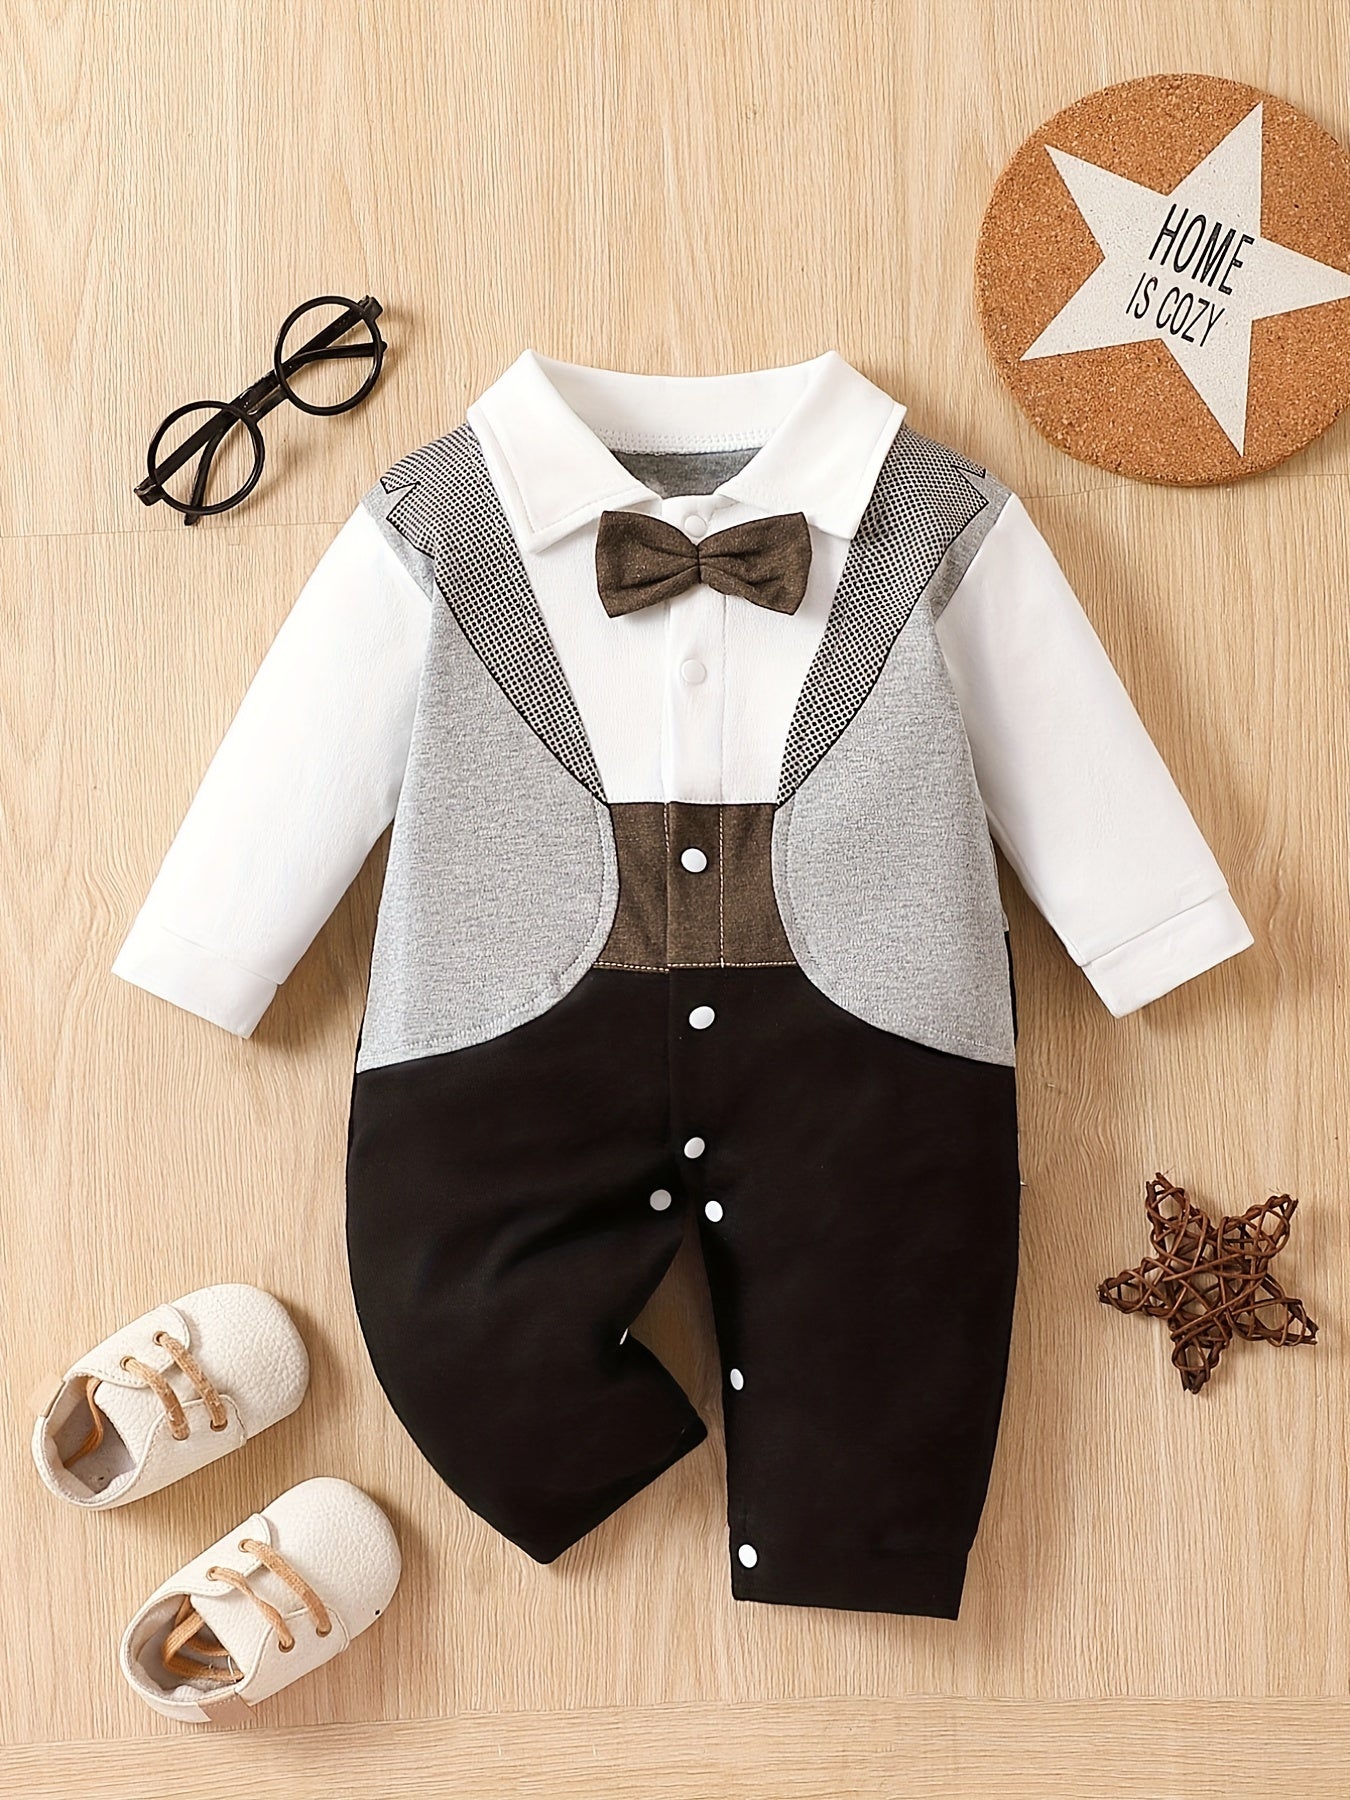 Little Gentleman Clothes Dress For Your Lovely Boy, Baby Long-sleeved Romper For Party Birthday